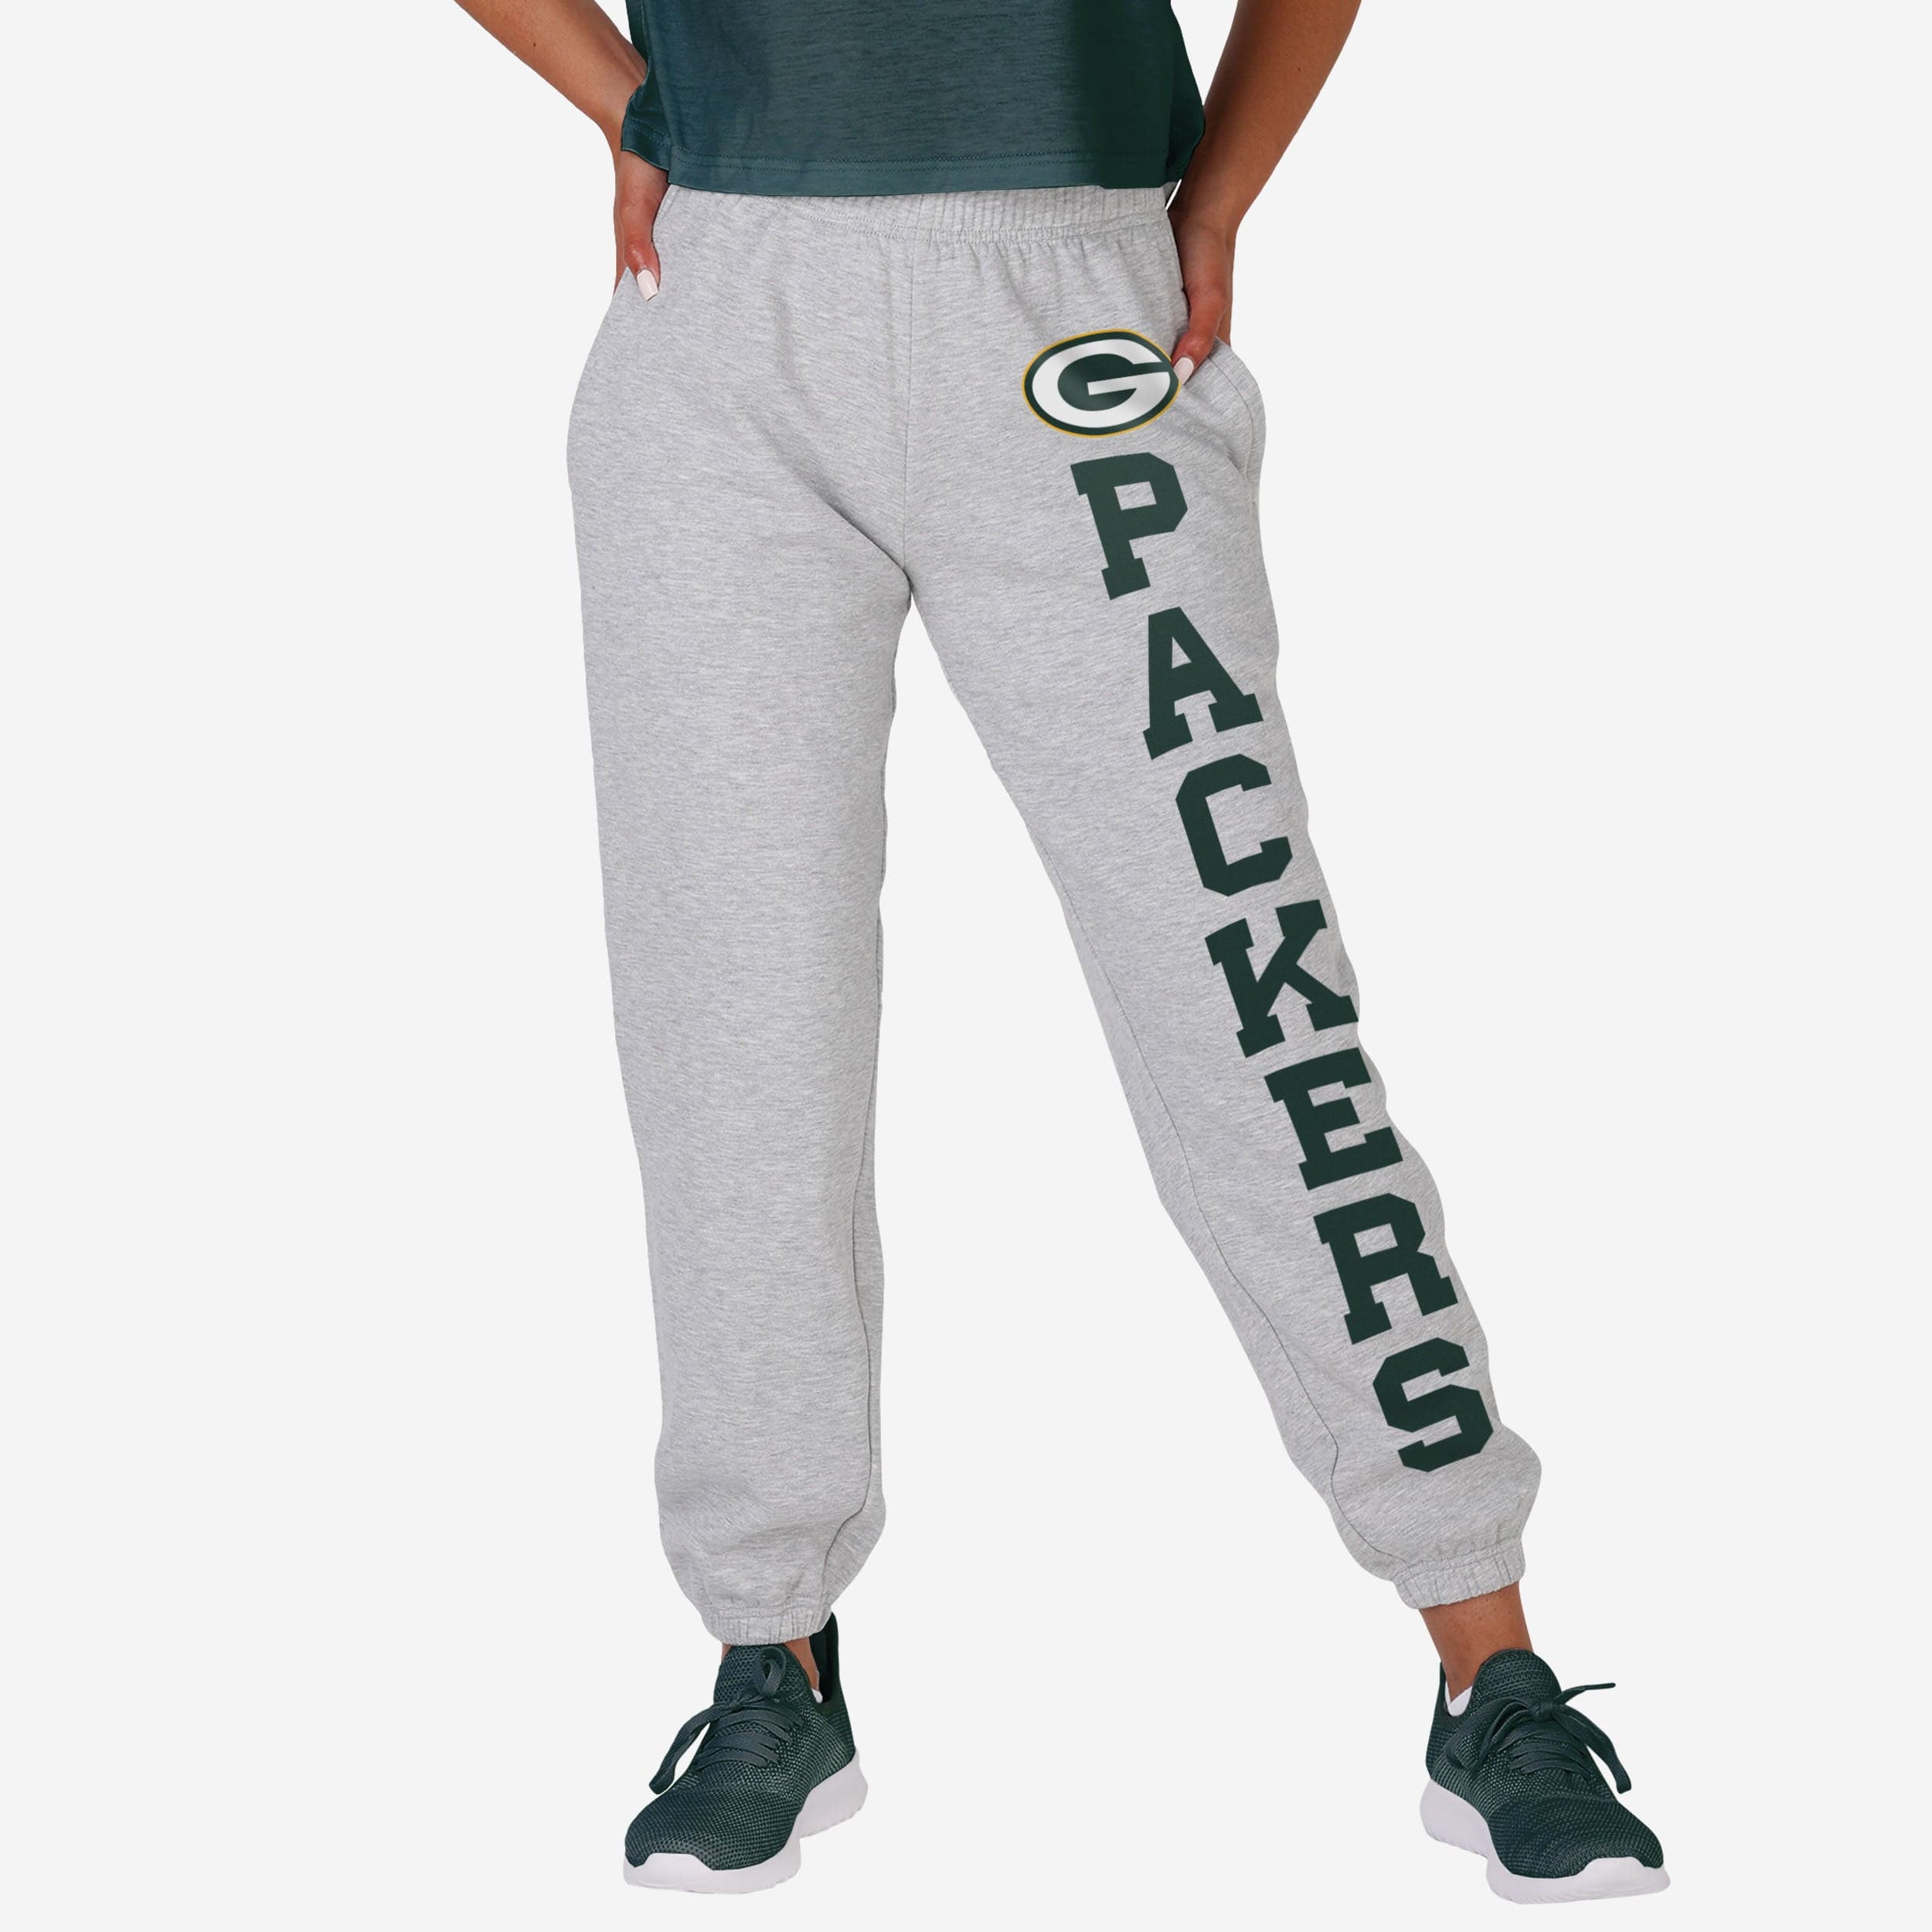 Green Bay Packers Concepts Sport Mainstream Cuffed Terry Pants - Gray